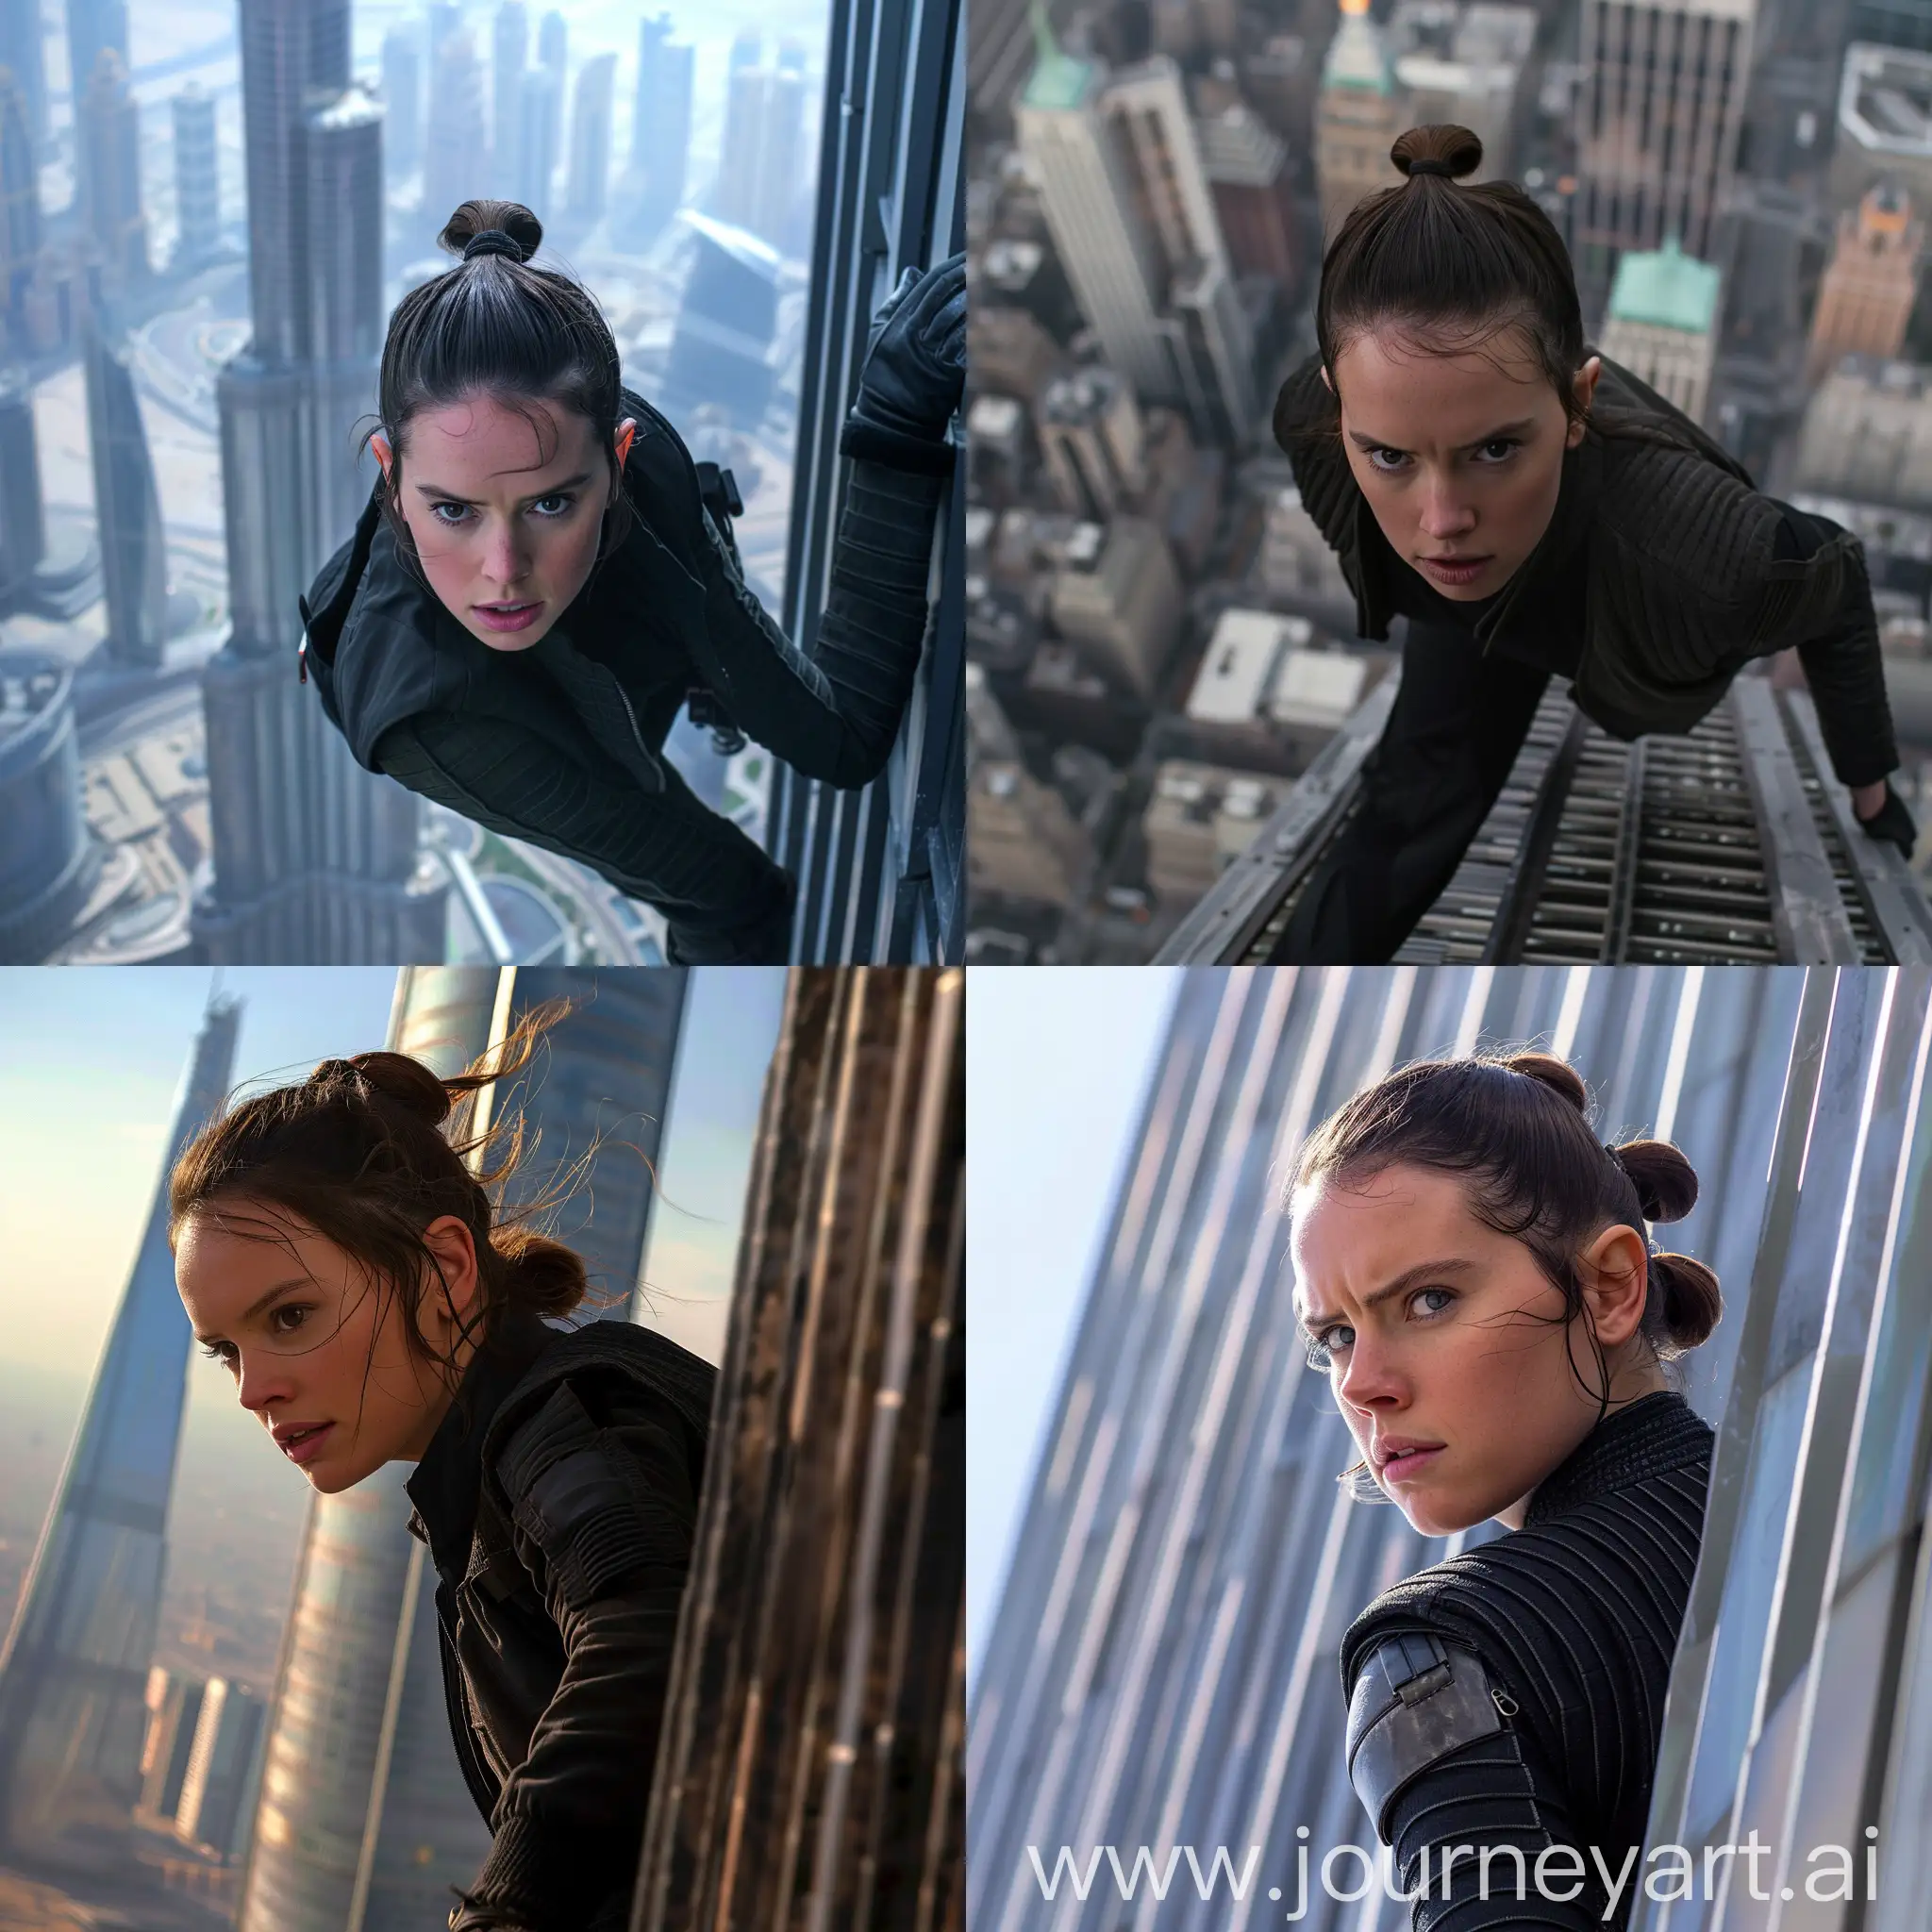 Daisy-Ridley-as-Rey-Climbing-Tallest-Building-Mission-Impossible-Tribute-in-8K